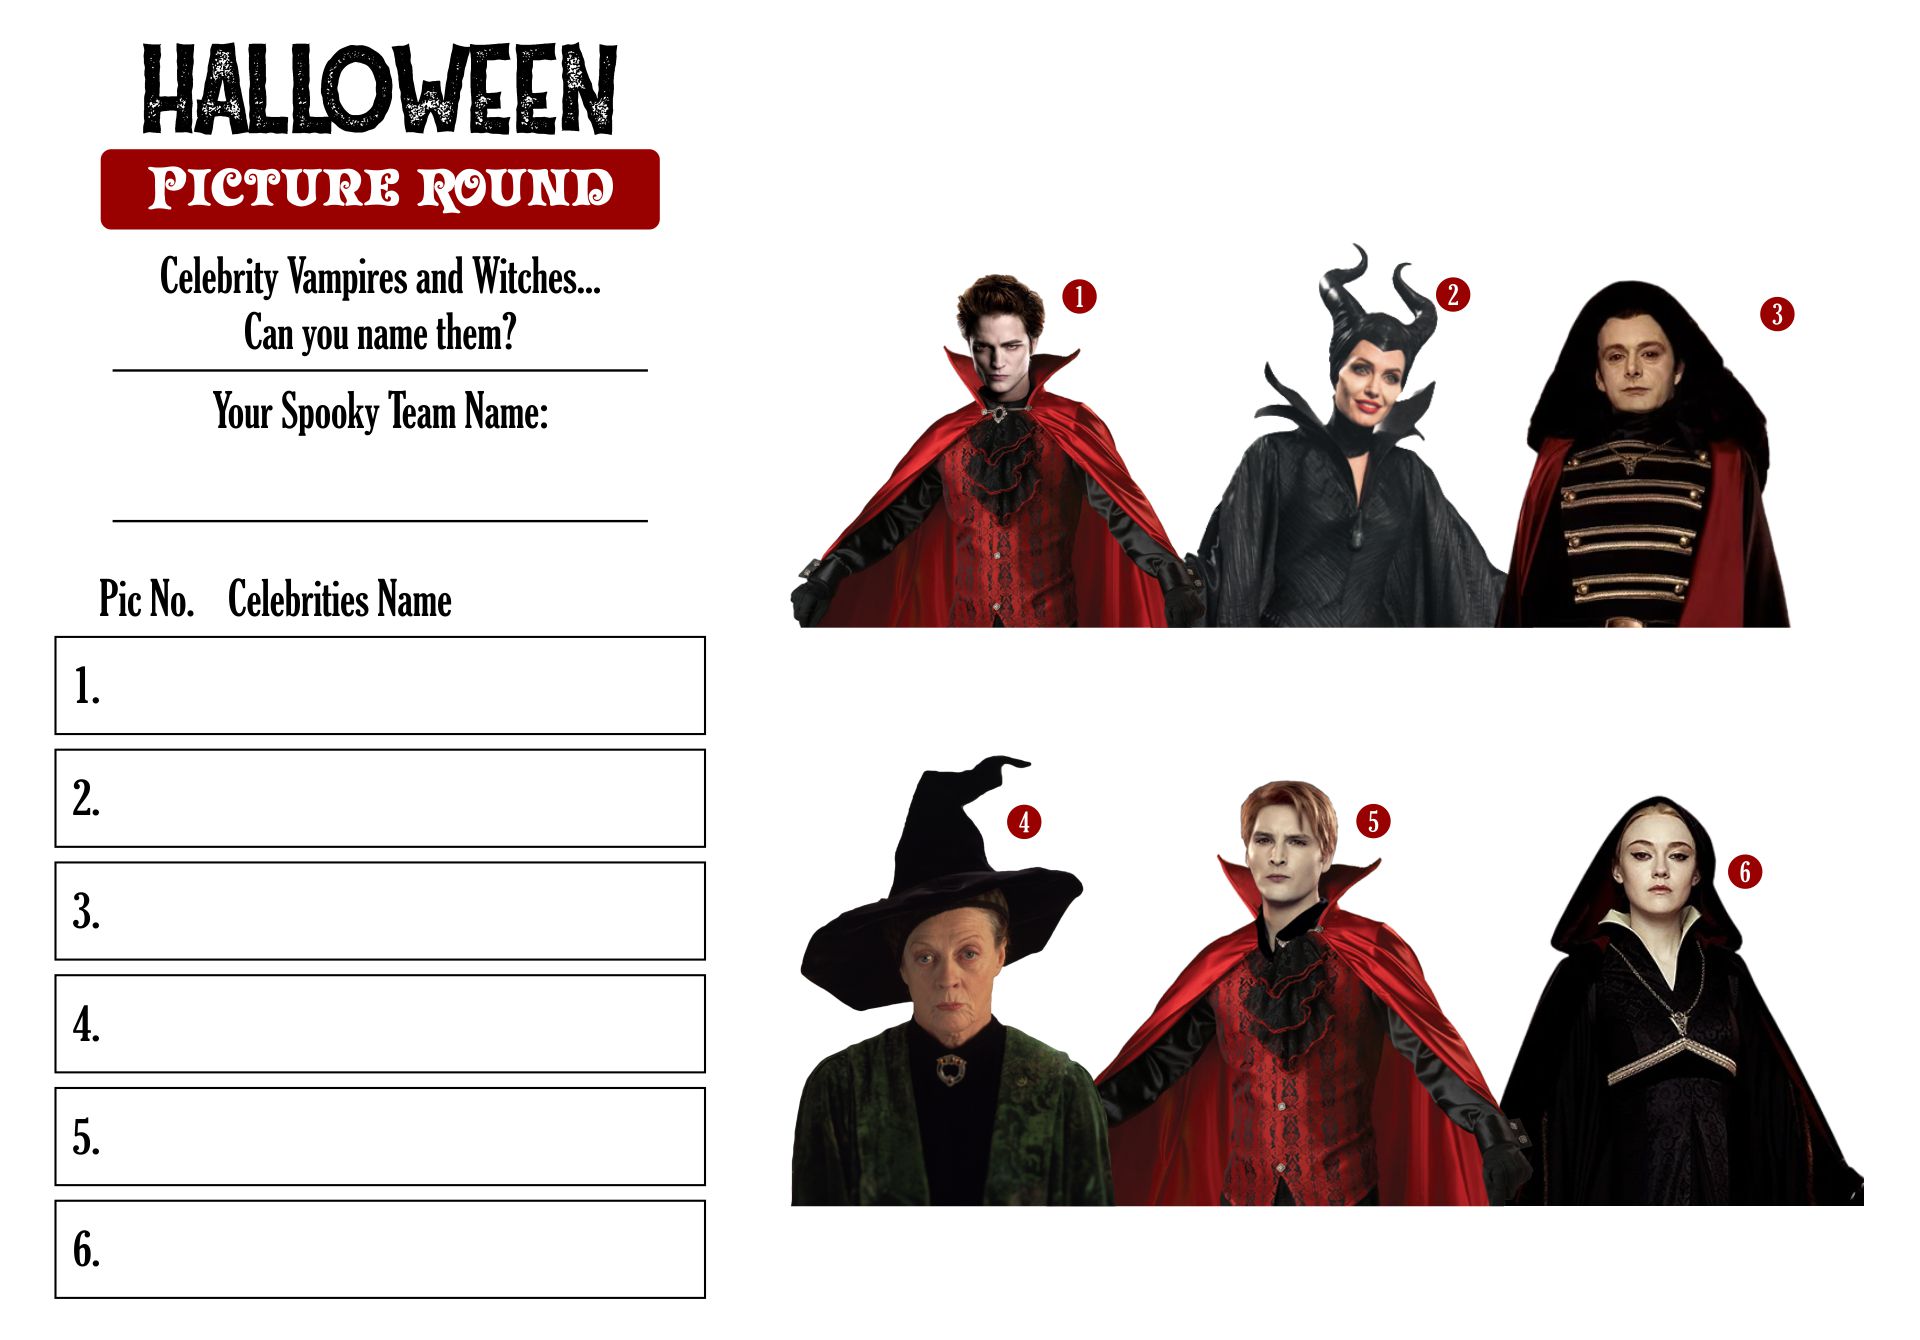 Halloween Quiz With Celebrity Vampires And Witches Printable